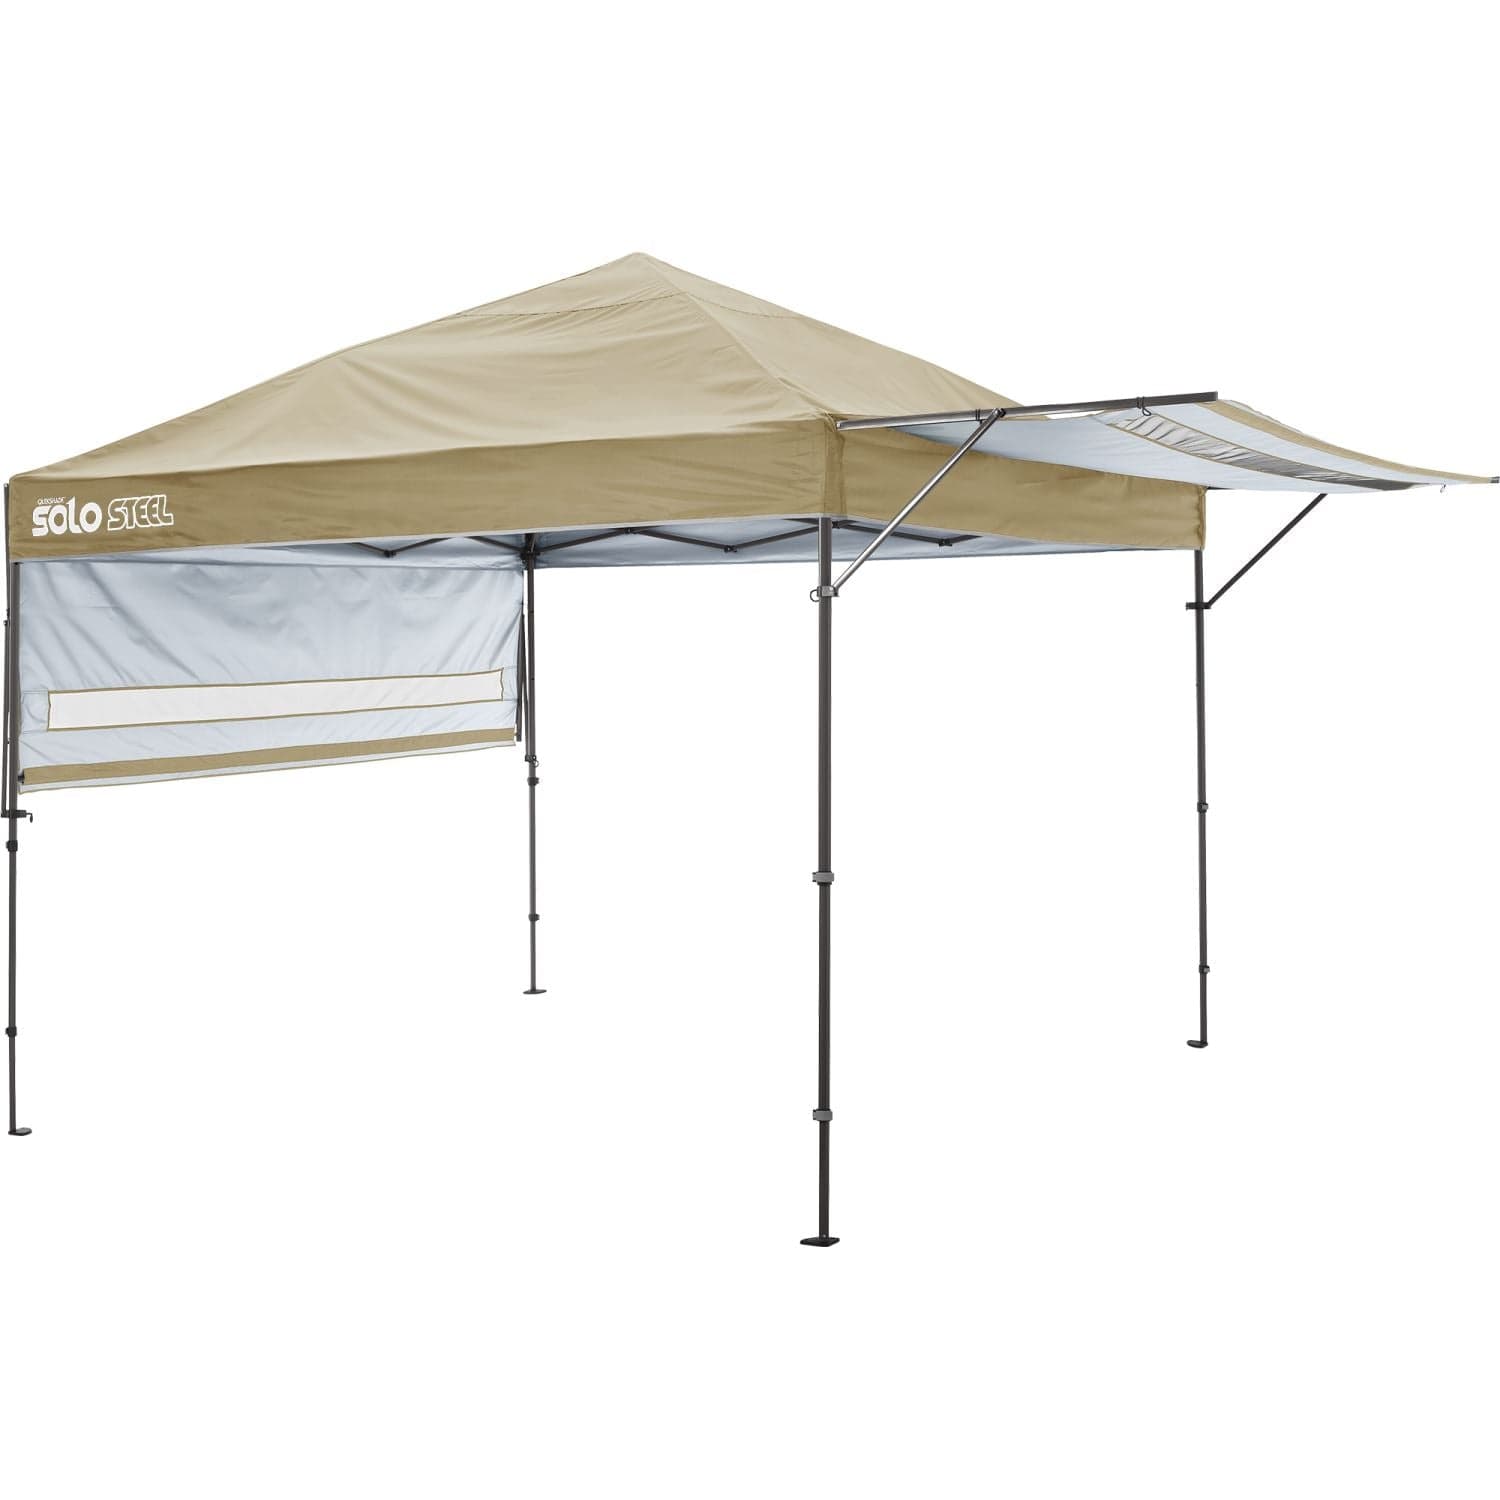 The Fulfiller Pop Up Canopies Quik Shade | Solo Steel 170 10' x 17' Straight Leg Canopy - Khaki 167544DS